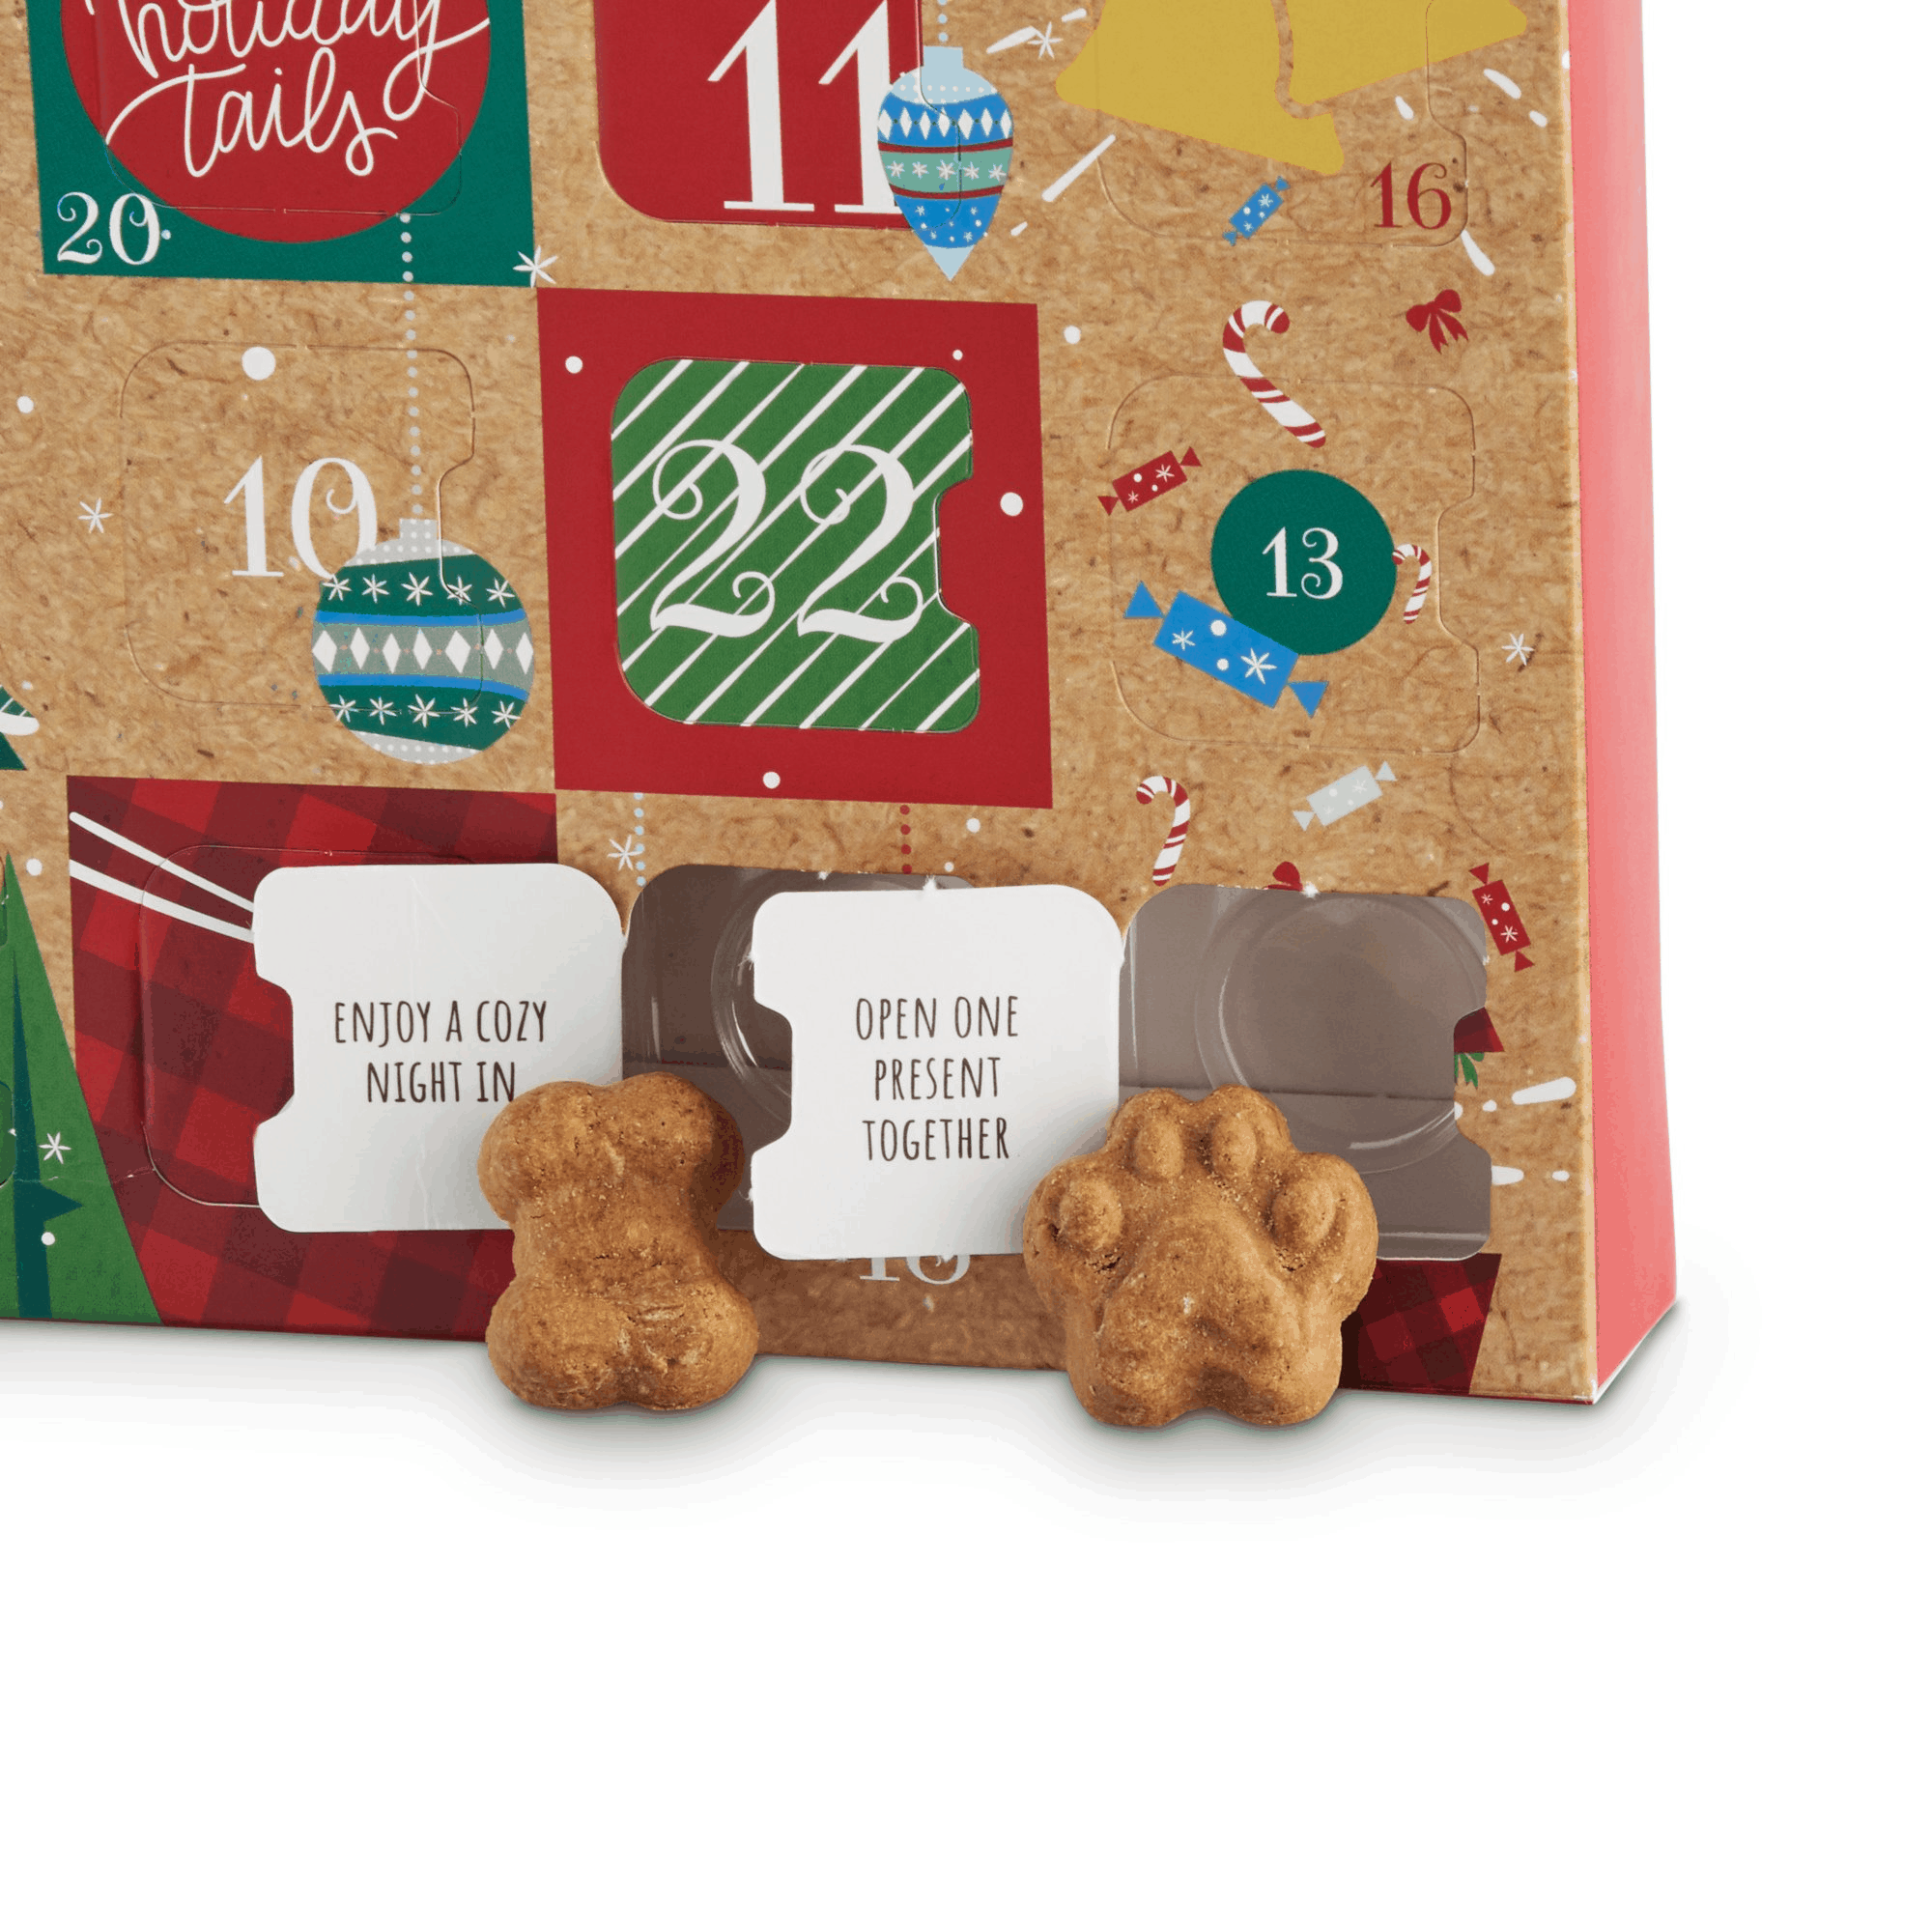 2019 Holiday Tails Dog Advent Calendar Available Now + Spoilers